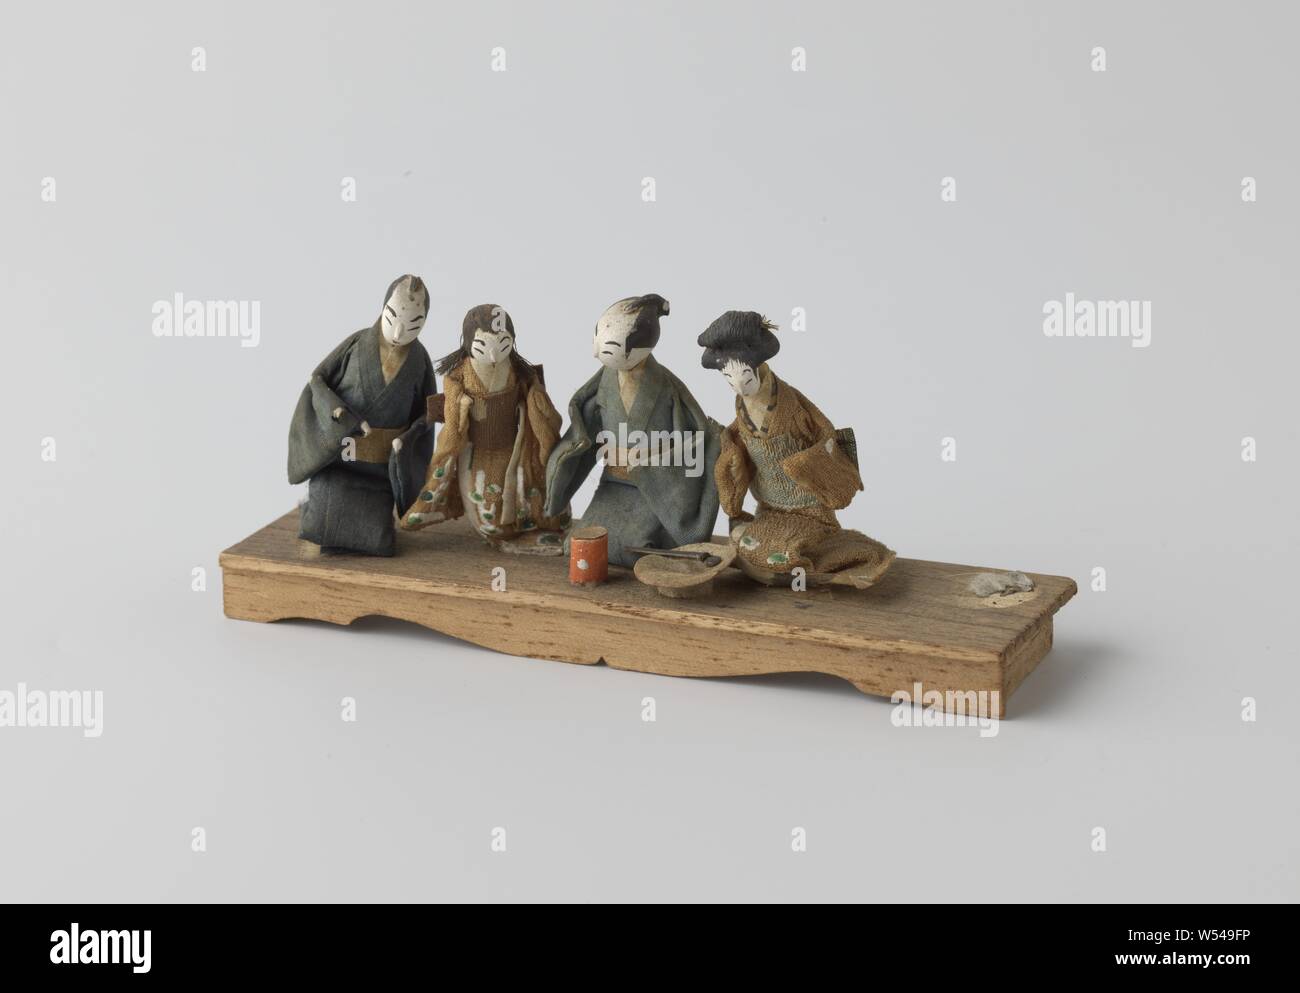 Elongated board with four squat dolls (one standing puppet is missing), Elongated board with four squat dolls and - originally - one standing in Japanese clothing. The standing doll is missing, Japan, 1900 - 2000, wood (plant material), h 6 cm × w 13.5 cm × d 4 cm Stock Photo